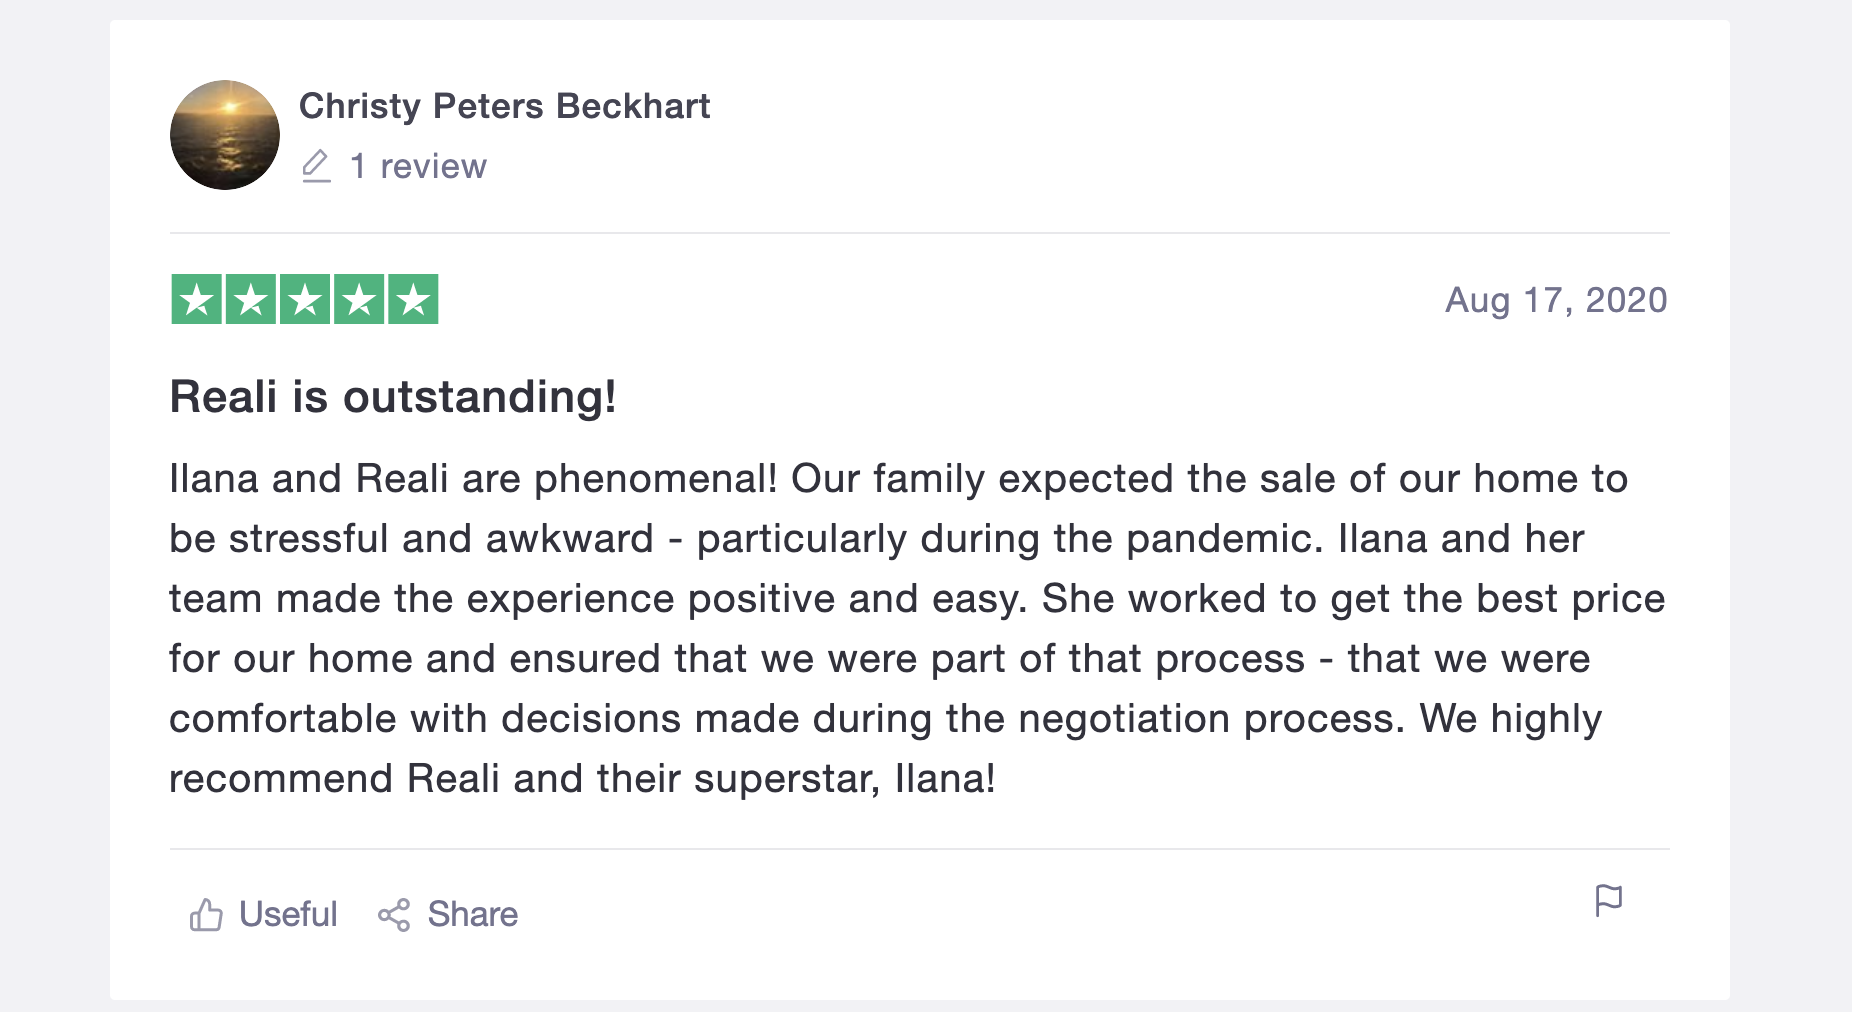 Ilana and Reali are phenomenal! Our family expected the sale of our home to be stressful and awkward - particularly during the pandemic. Ilana and her team made
the experience positive and easy. She worked to get the best price for our home and ensured that we were part of that process - that we were comfortable with decisions made during the negotiation process. We highly recommend Reali and their superstar,
Ilana!